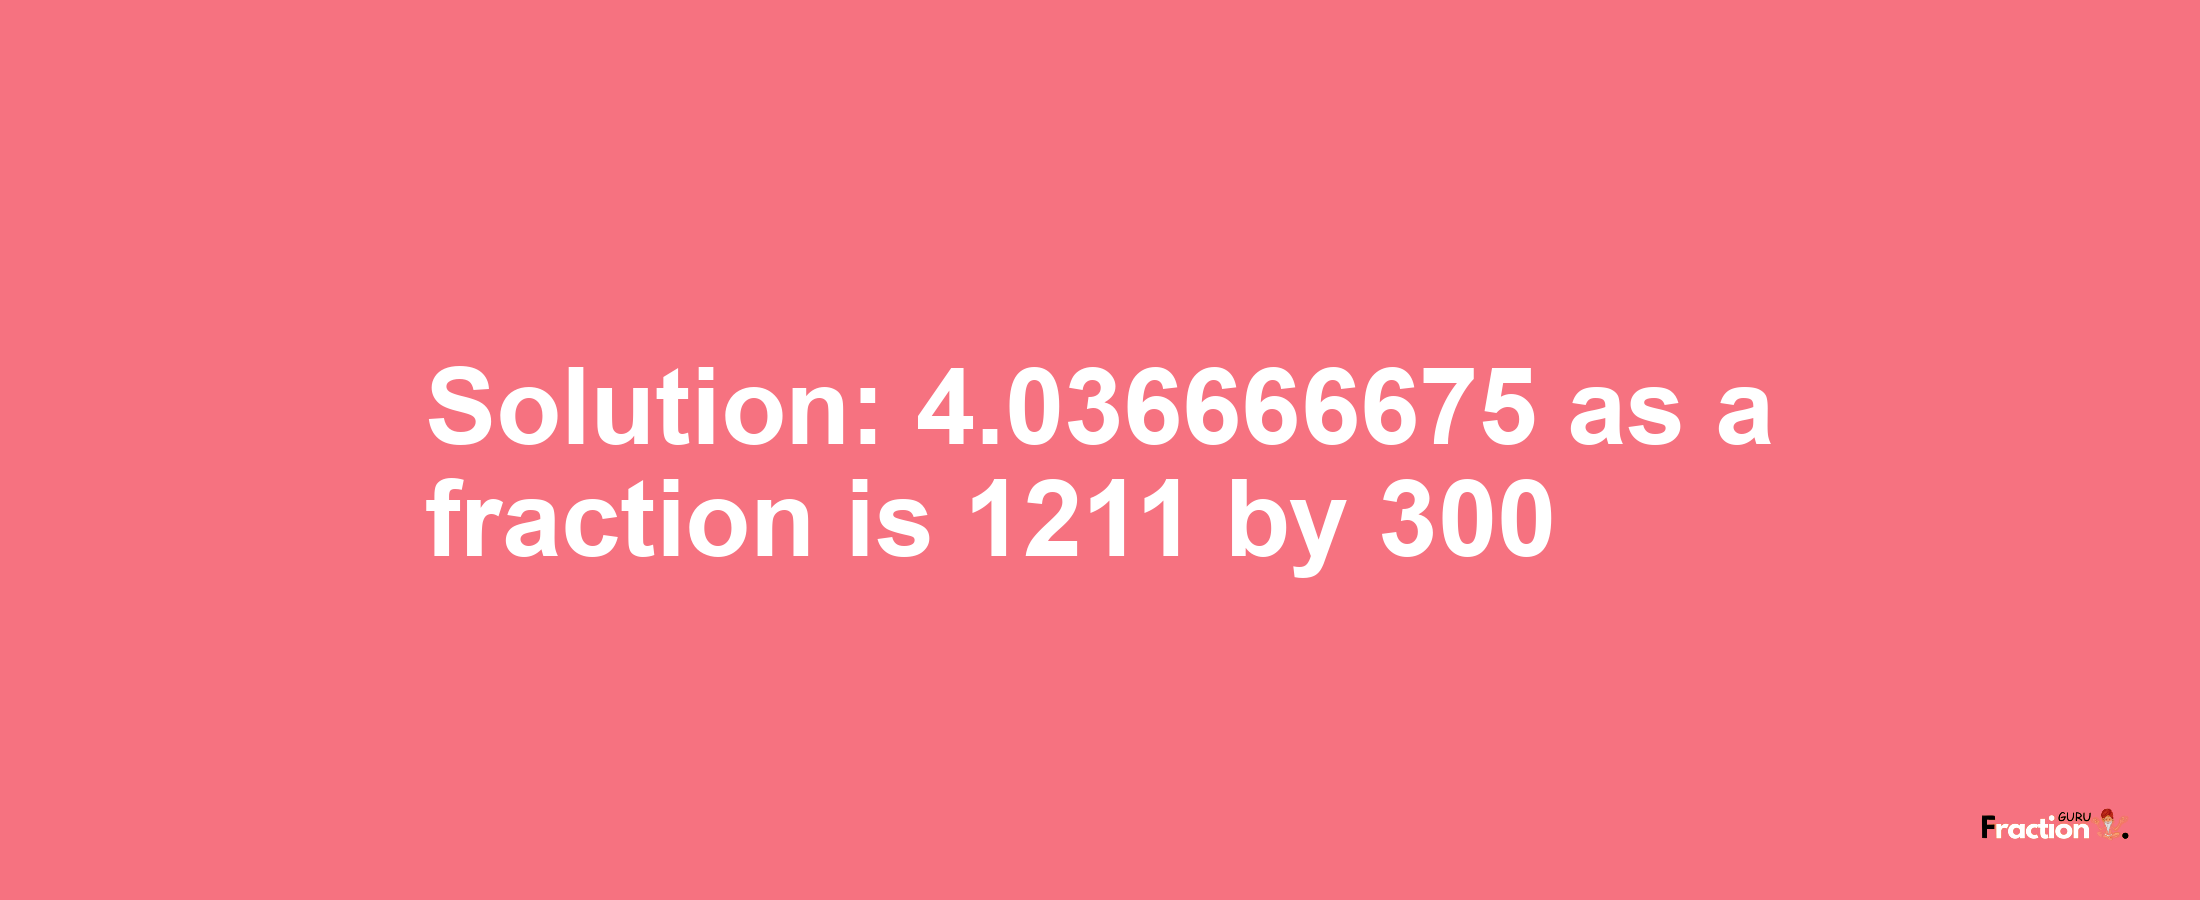 Solution:4.036666675 as a fraction is 1211/300